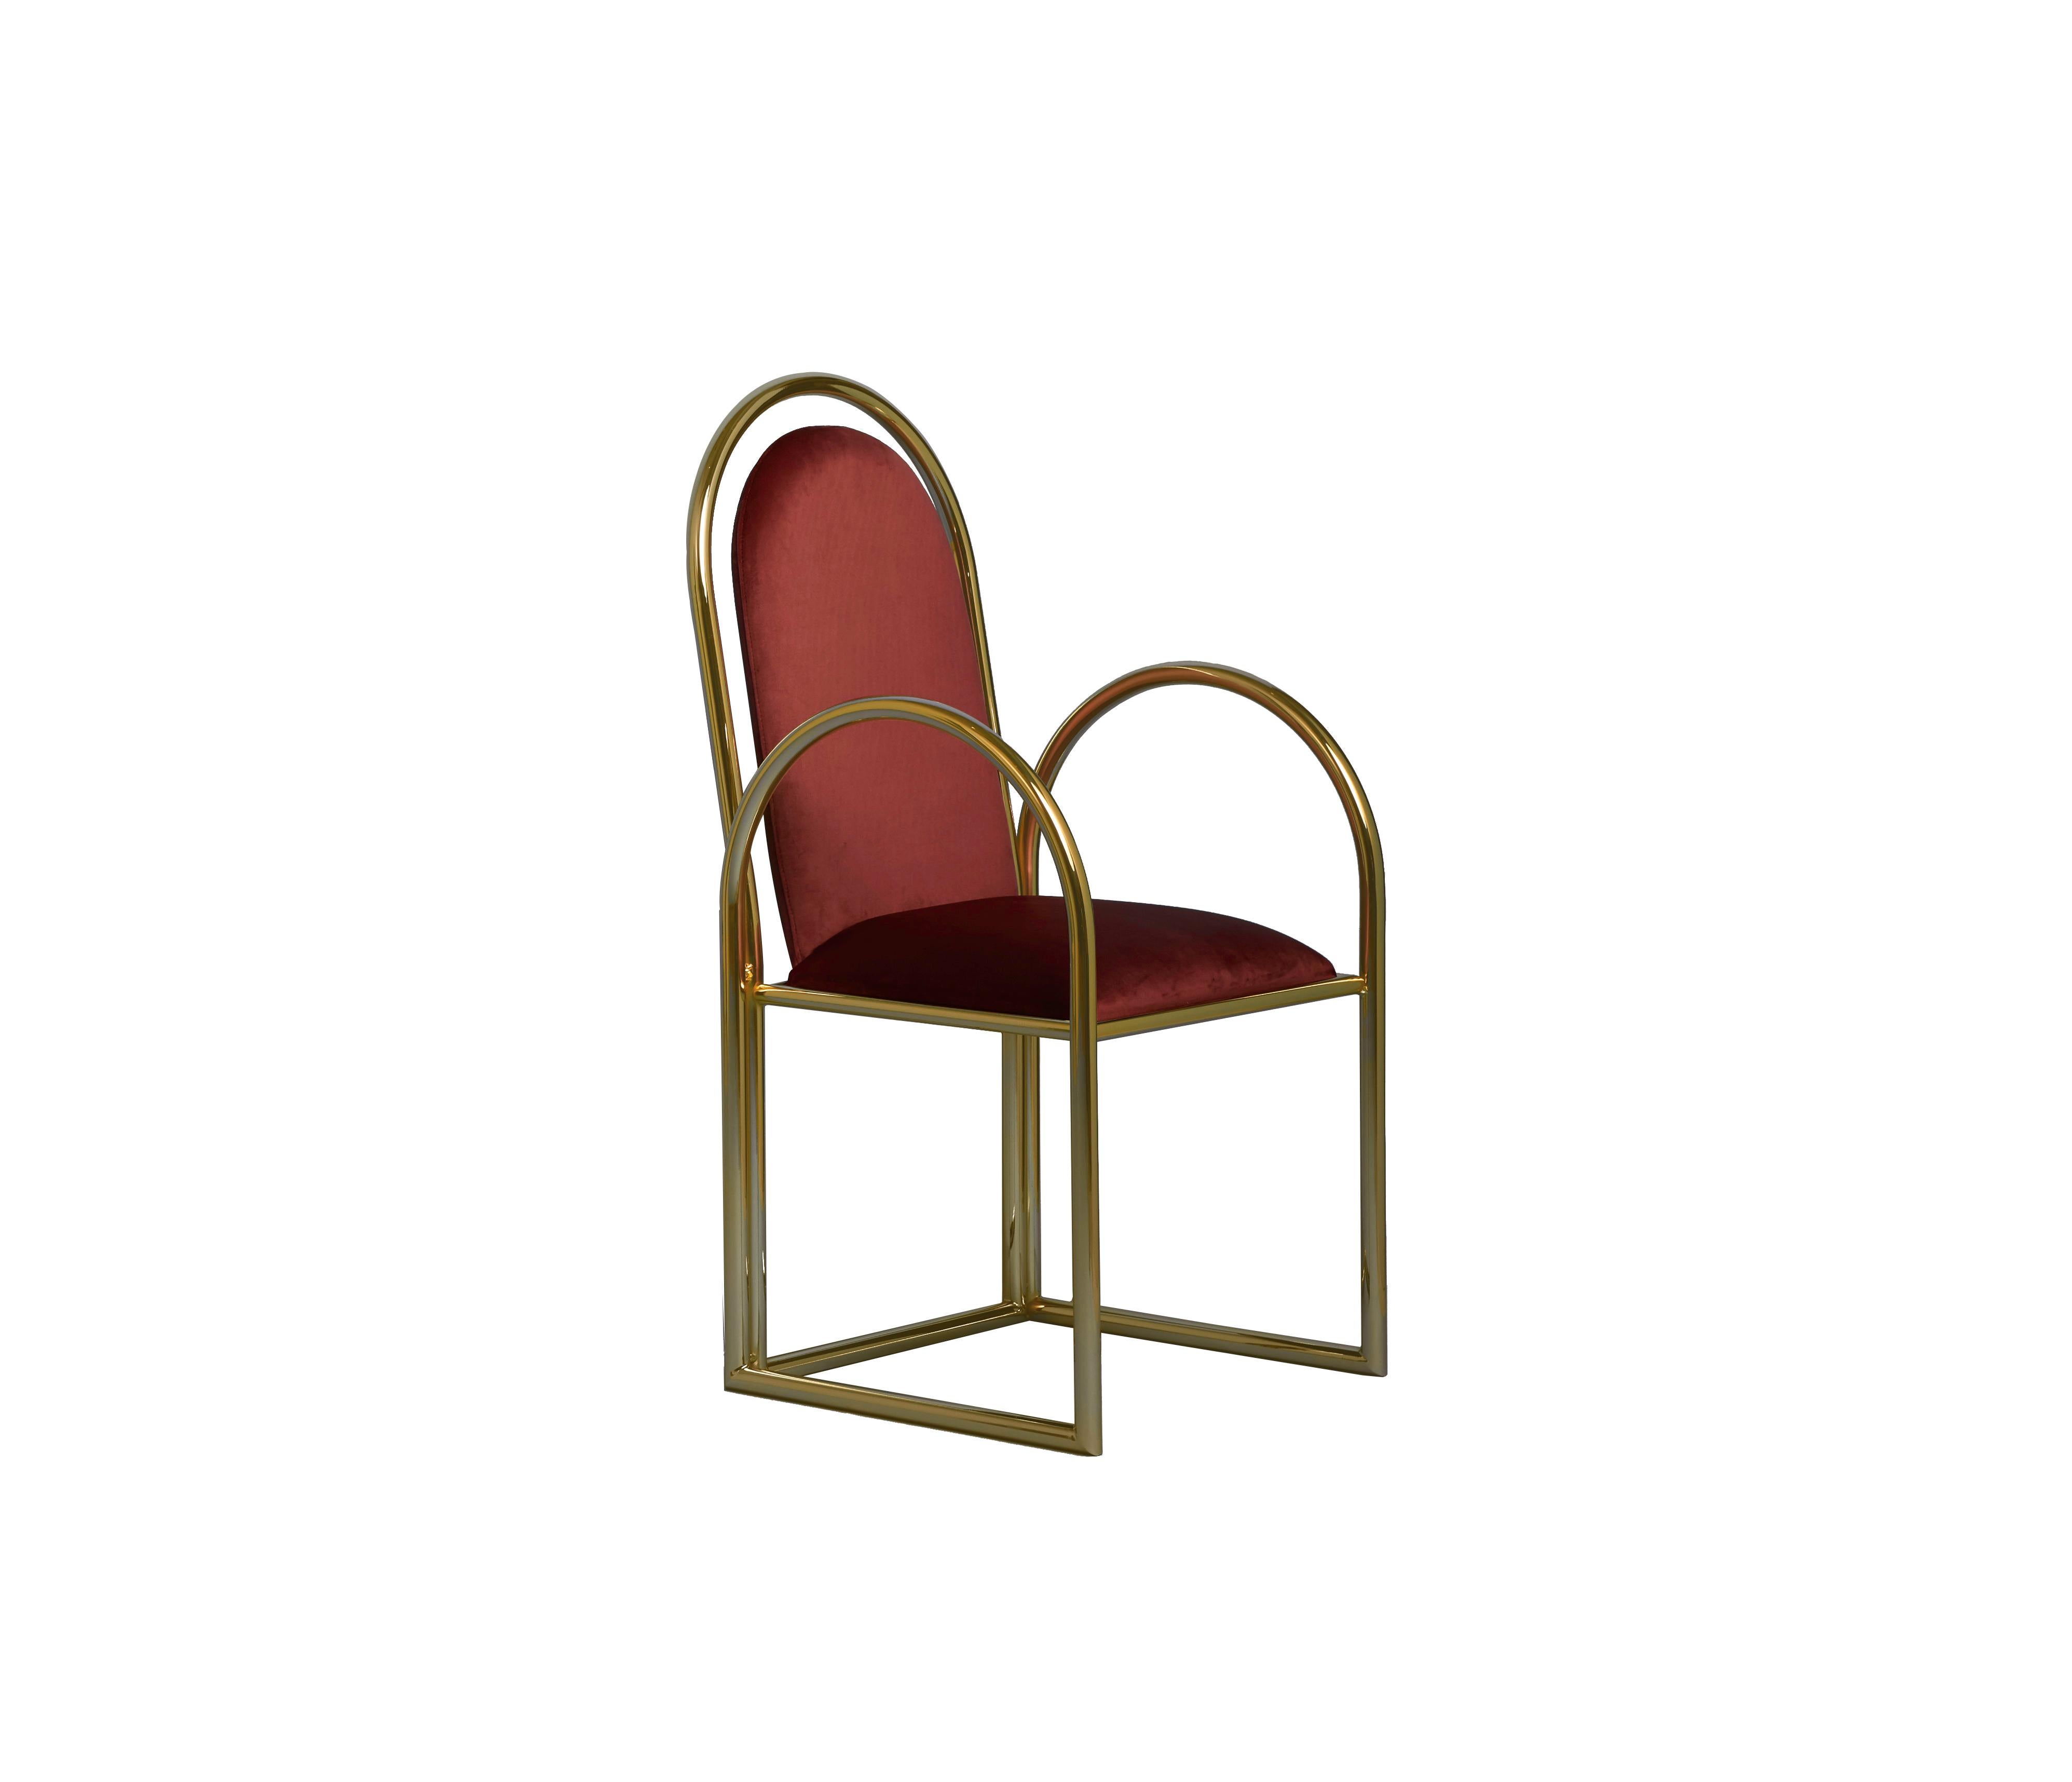 Arco chair by Houtique
Materials: Metallic structure bathed in 24 Ct gold // epoxy paint
 Upholstery Velvet
Dimensions: 47 x 45 x H 100 cm
 Seat height: 46 cm

Chairs, tables and stools with fun shapes inspired in the 80’s.

Structure: 25mm